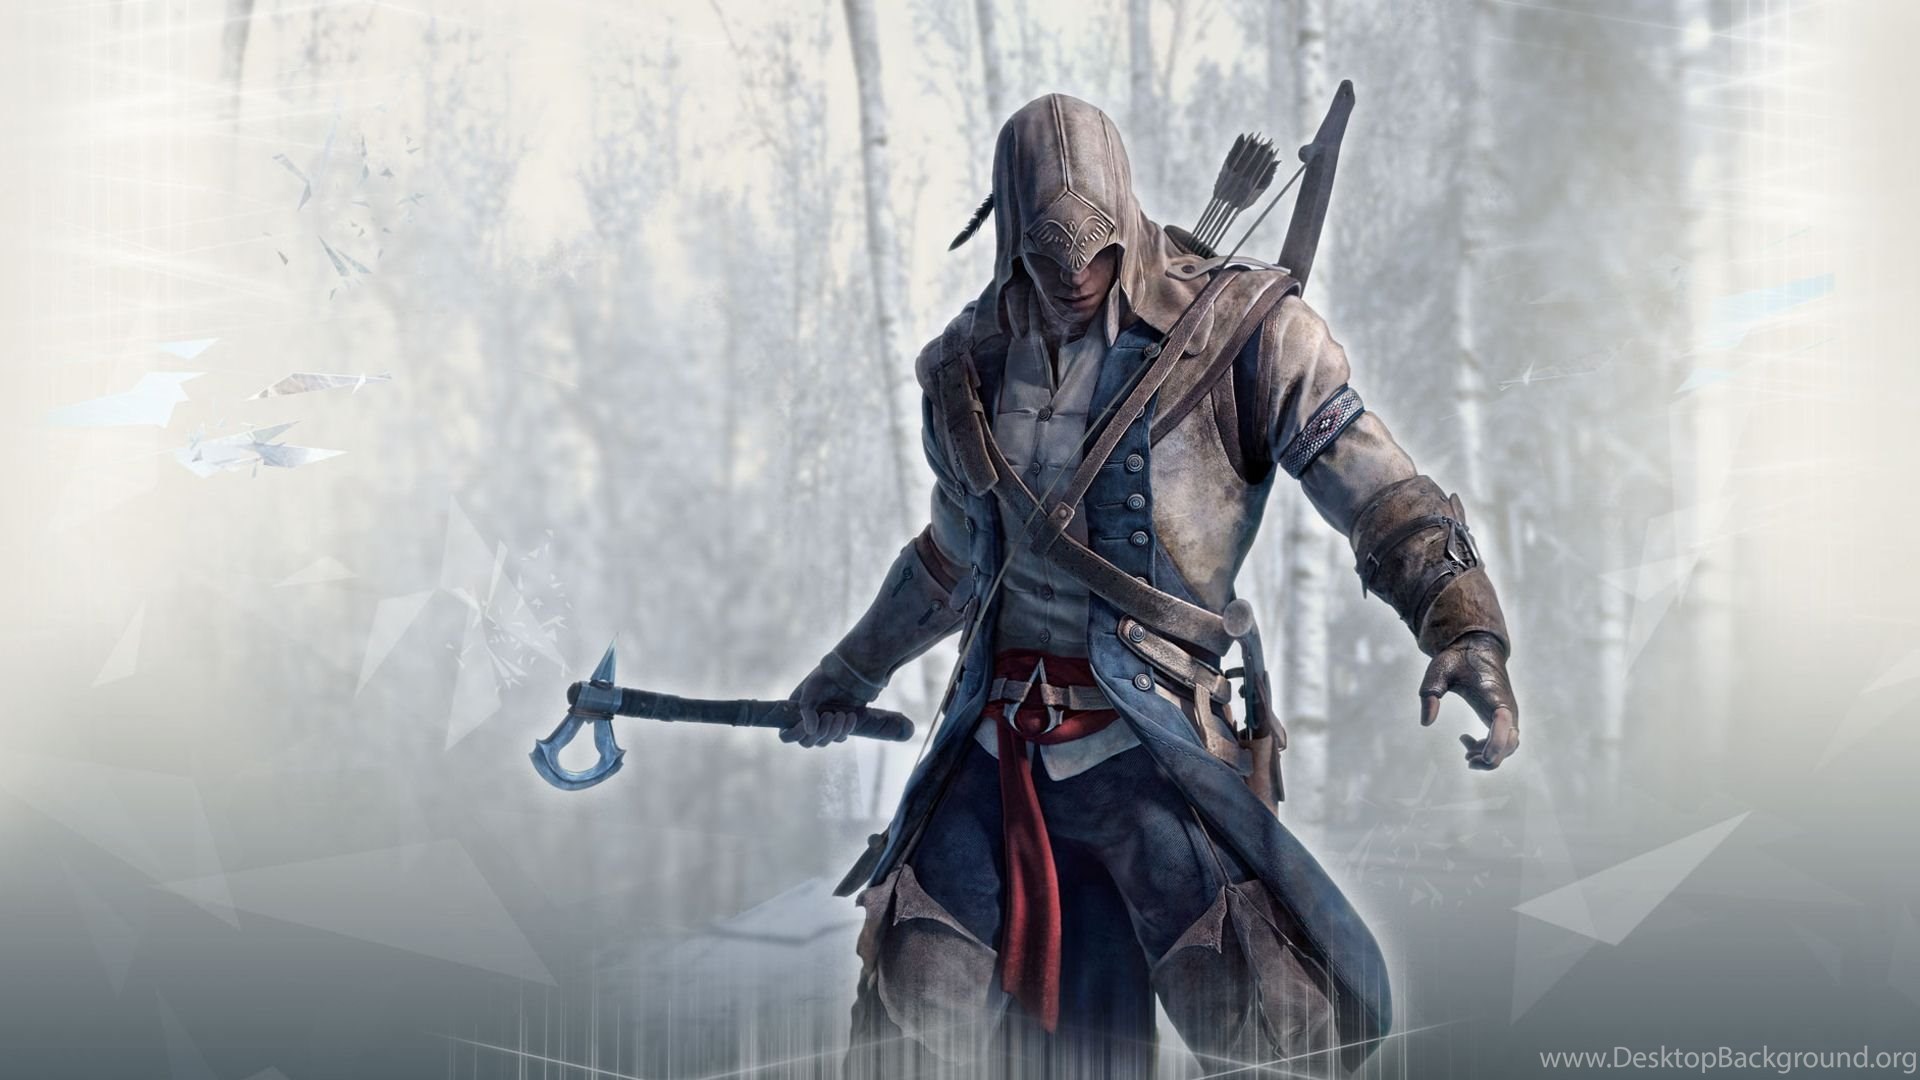 wallpaper of assassin creed,action adventure game,pc game,cg artwork,illustration,fictional character